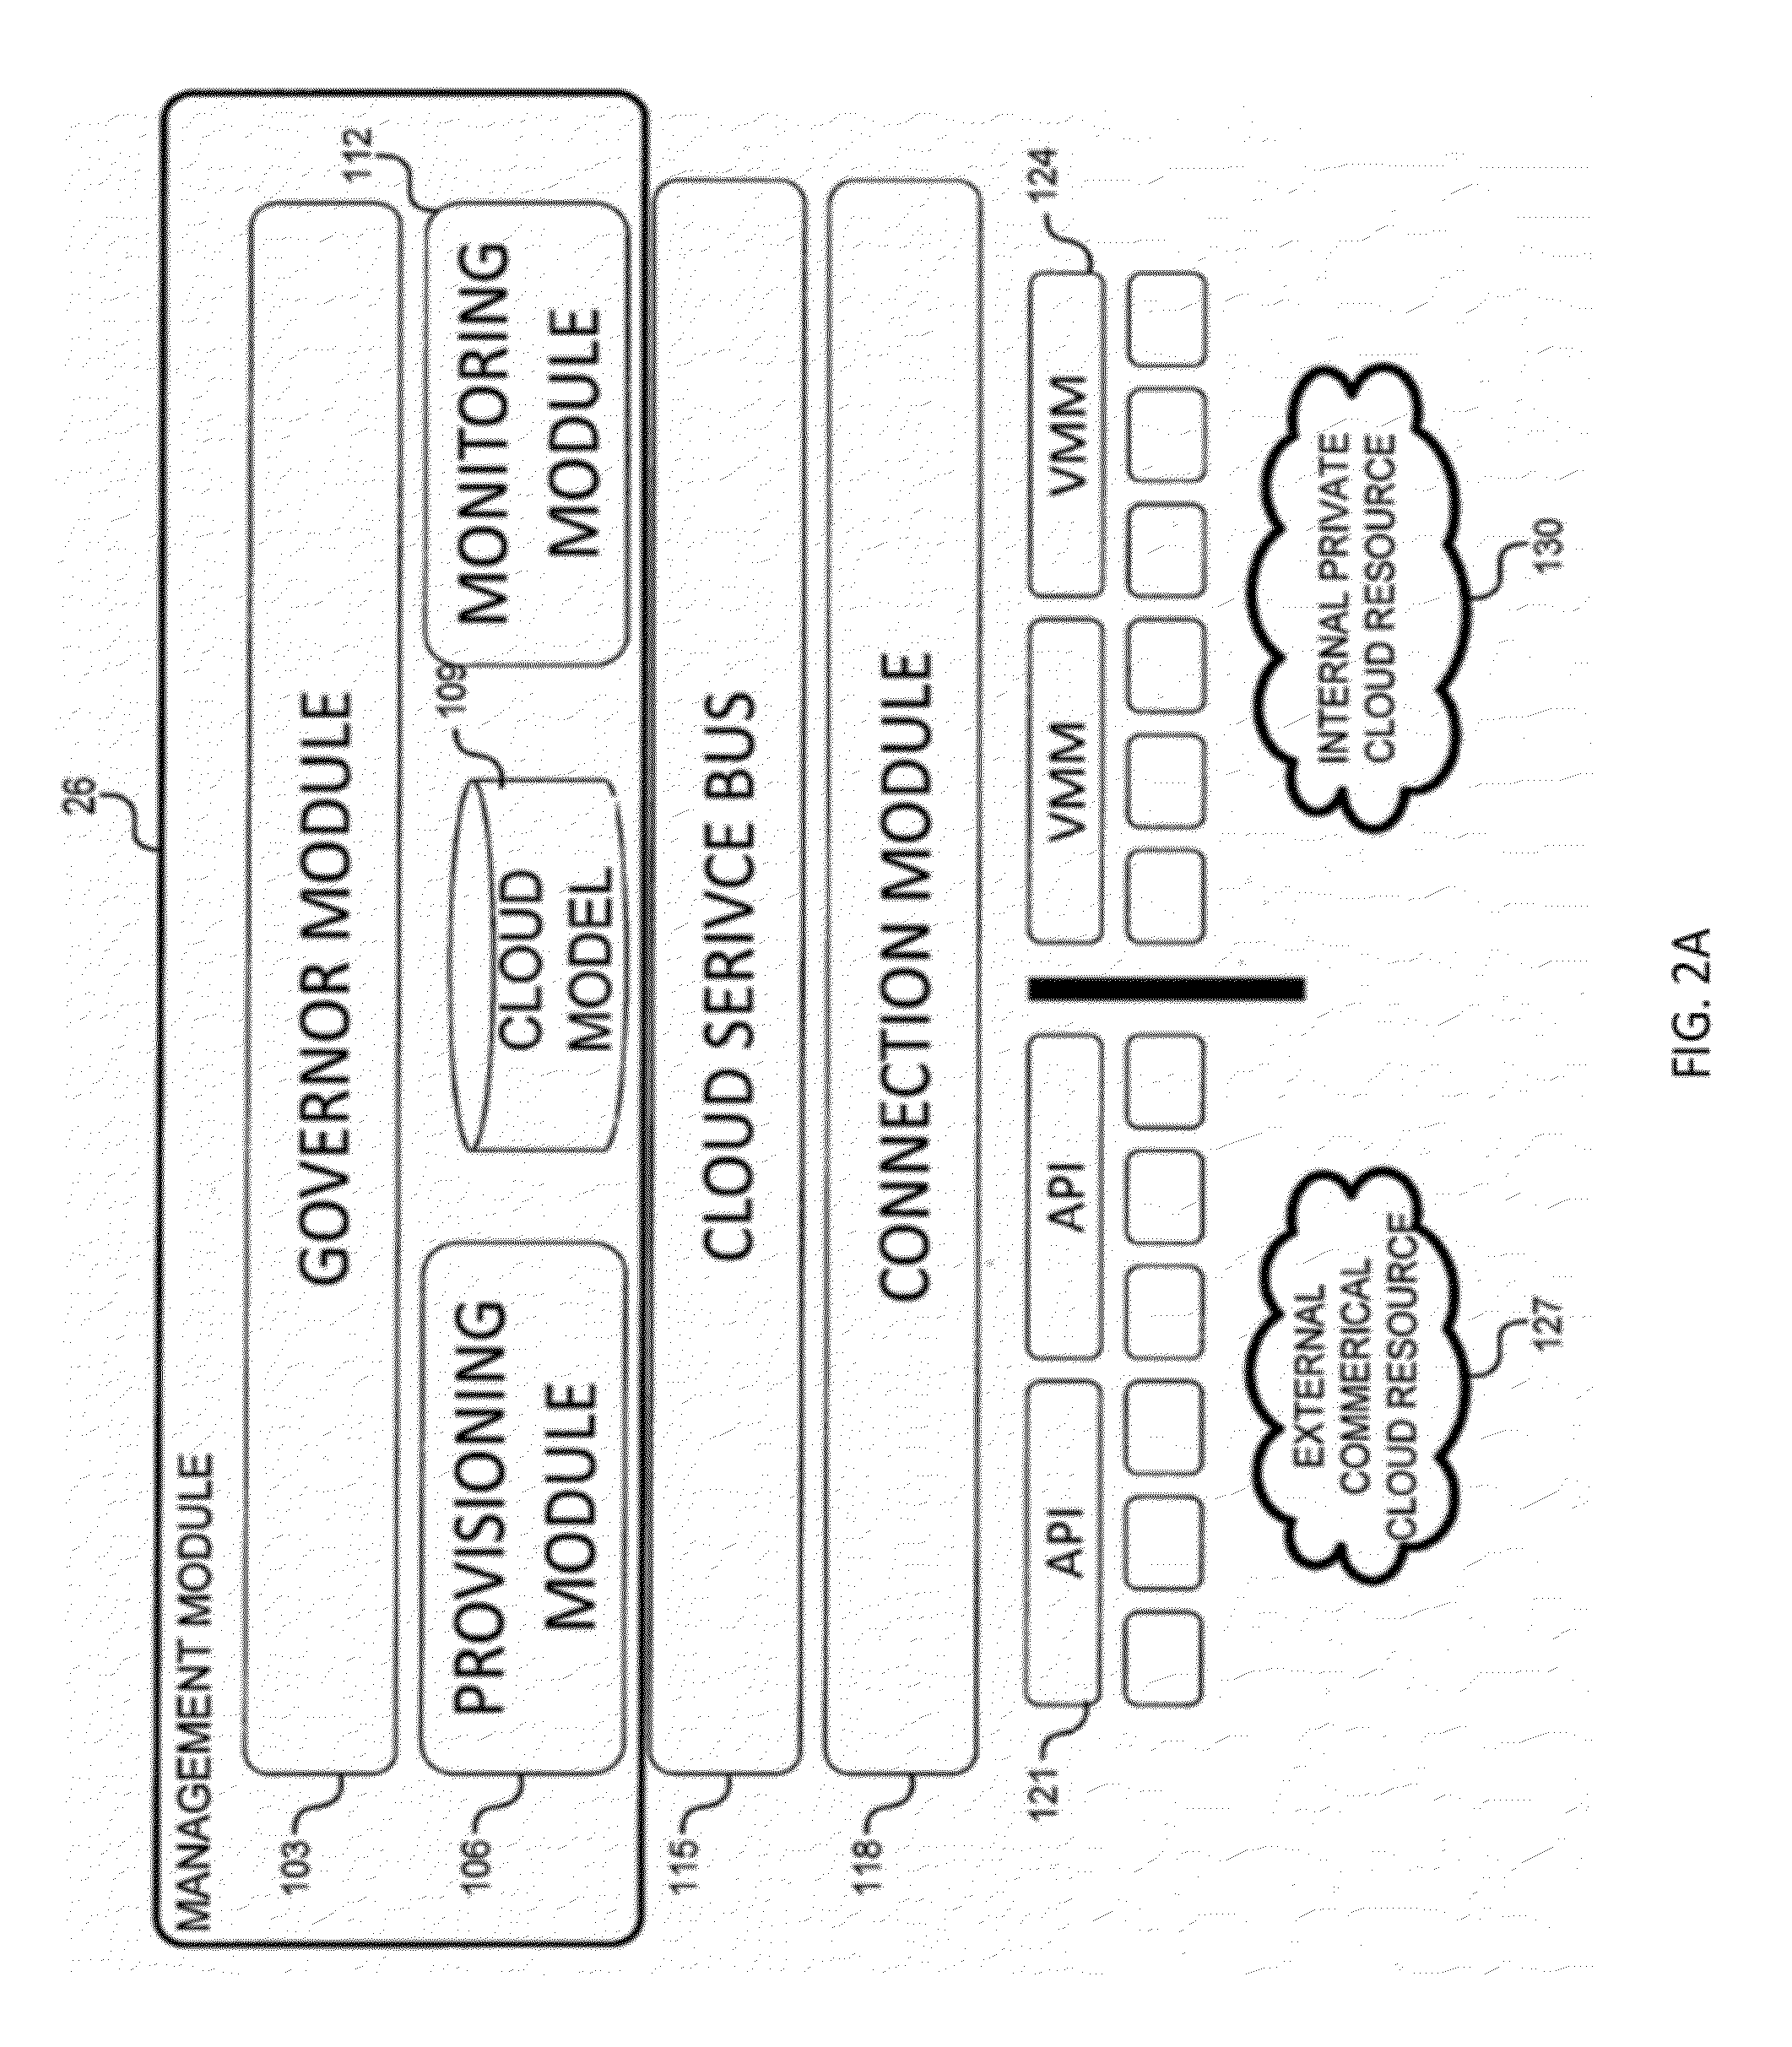 System and method for a cloud computing abstraction layer with security zone facilities